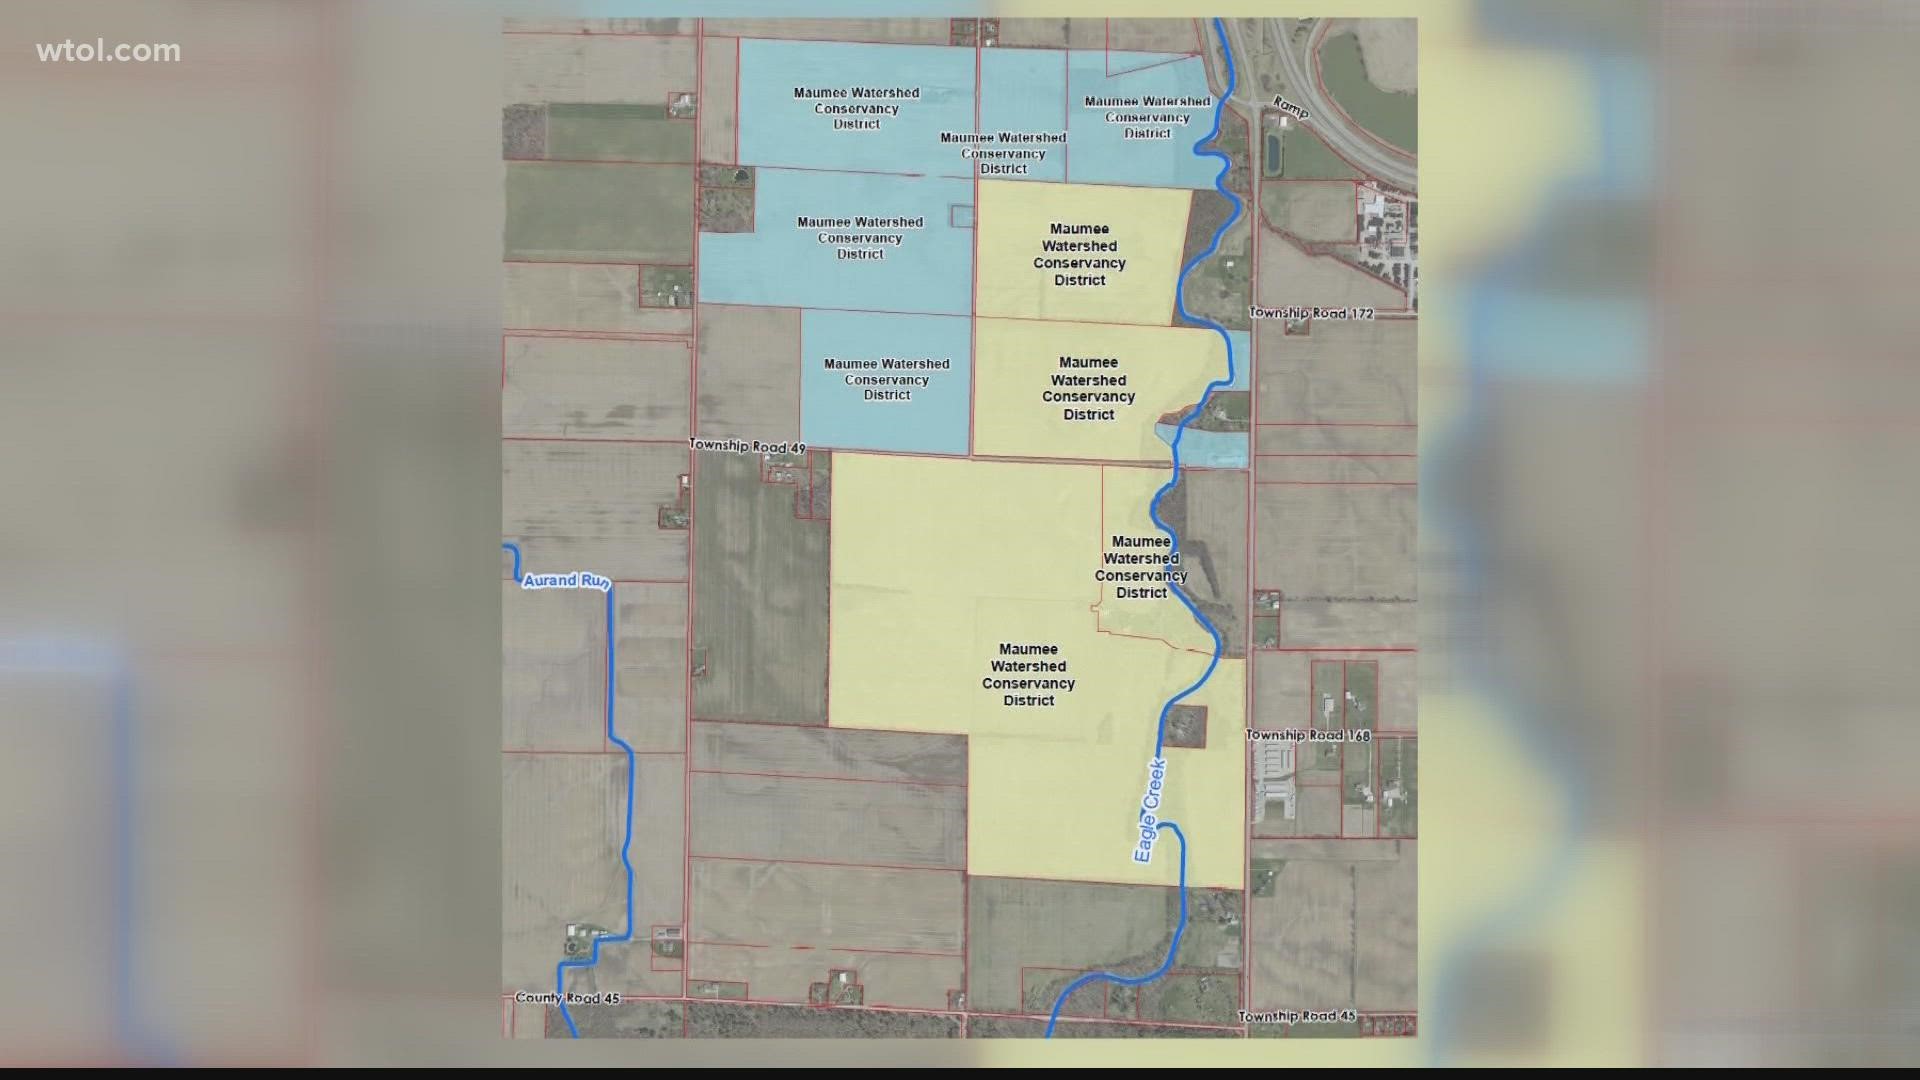 The Maumee Watershed Conservancy District approved the purchase of the two properties last week.